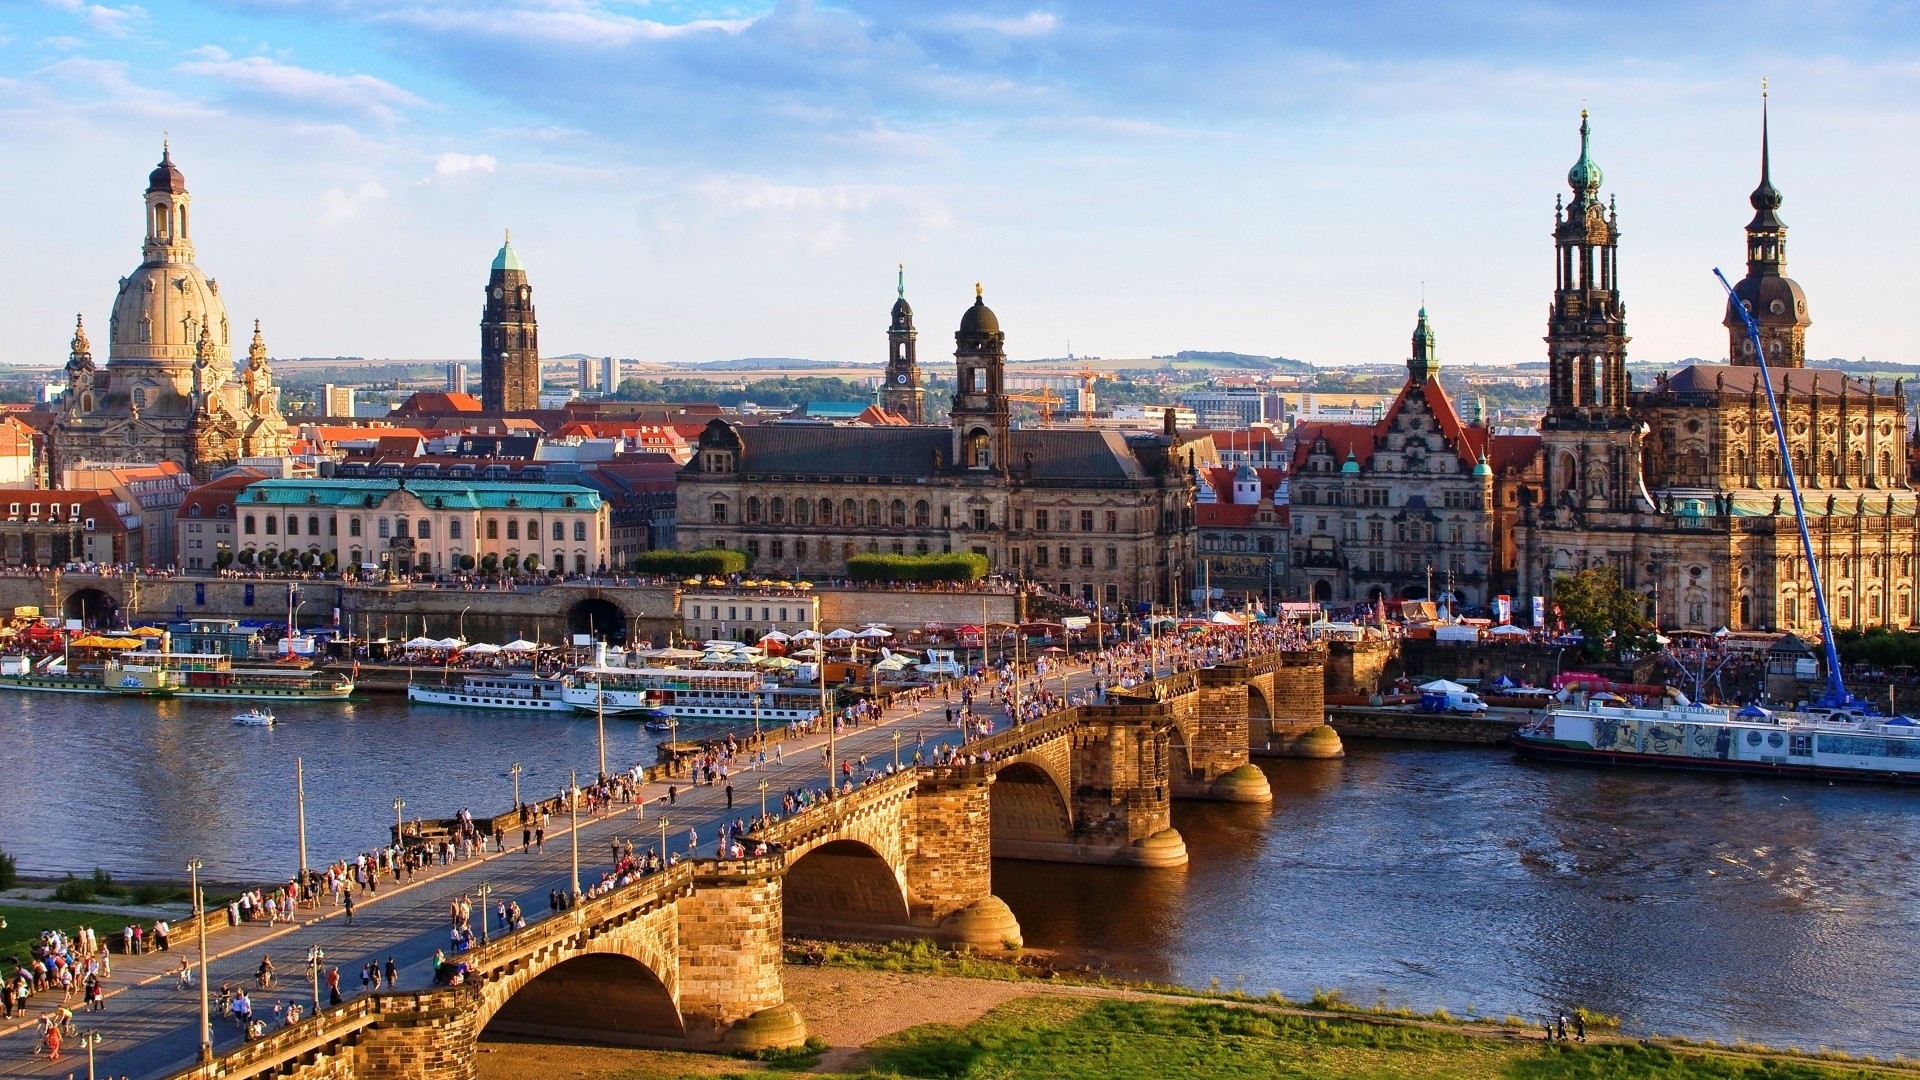 General 1920x1080 architecture city cityscape trees building Dresden Germany bridge old bridge old building church cathedral tower ship water river crowds clouds